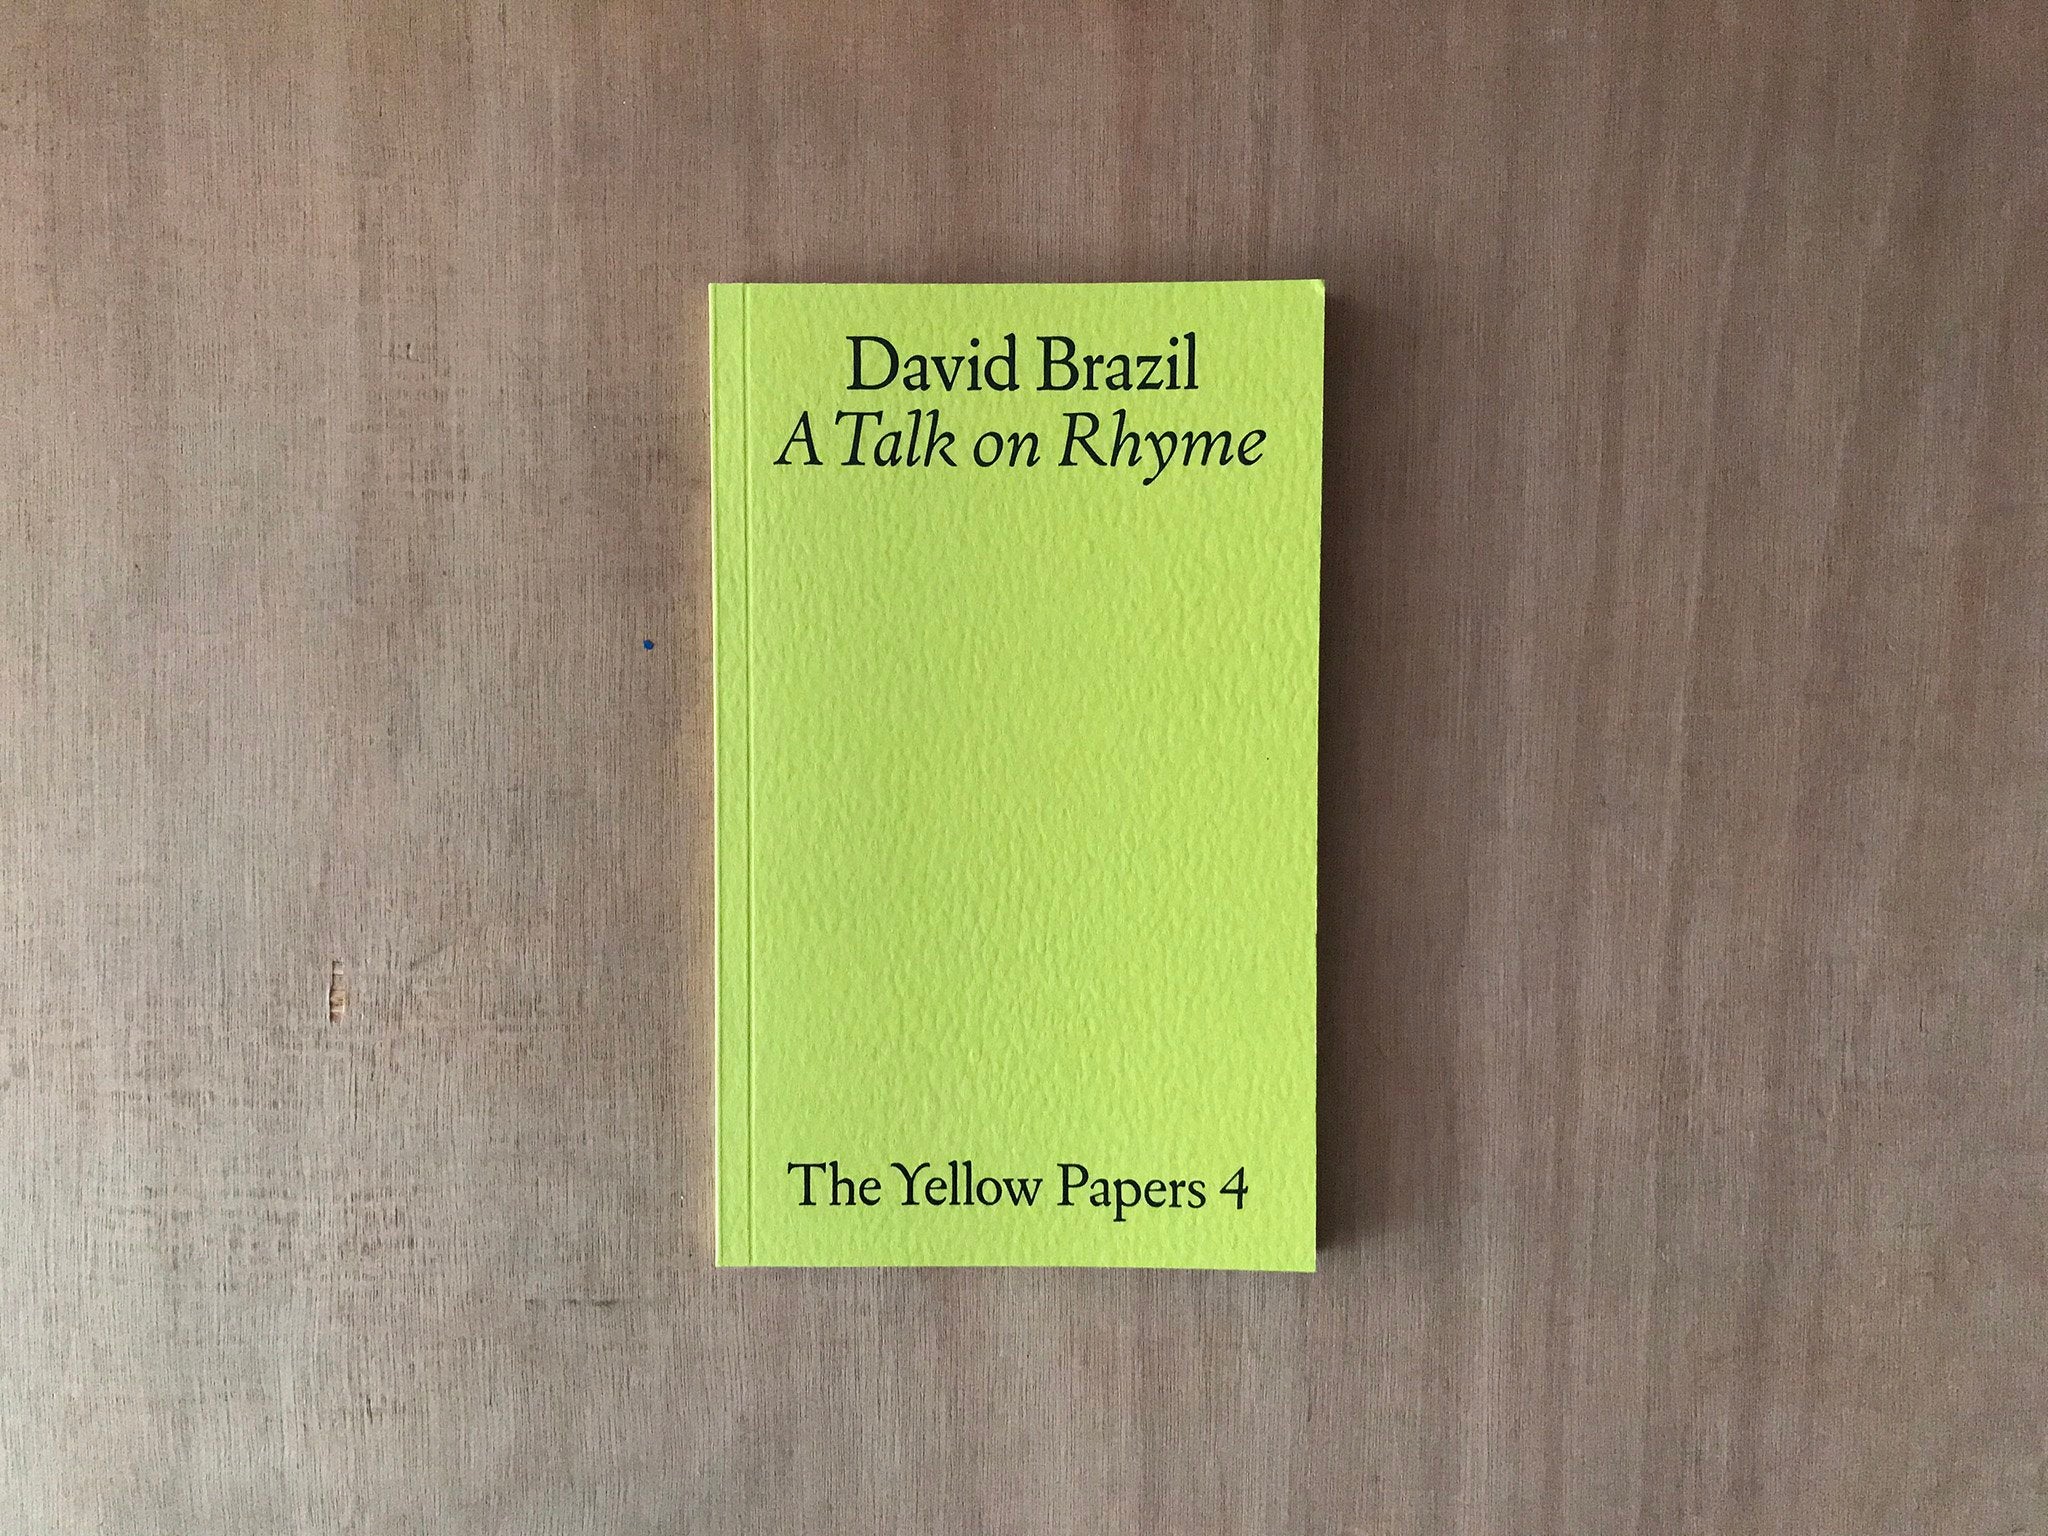 THE YELLOW PAPERS 4: A TALK ON RHYME by David Brazil